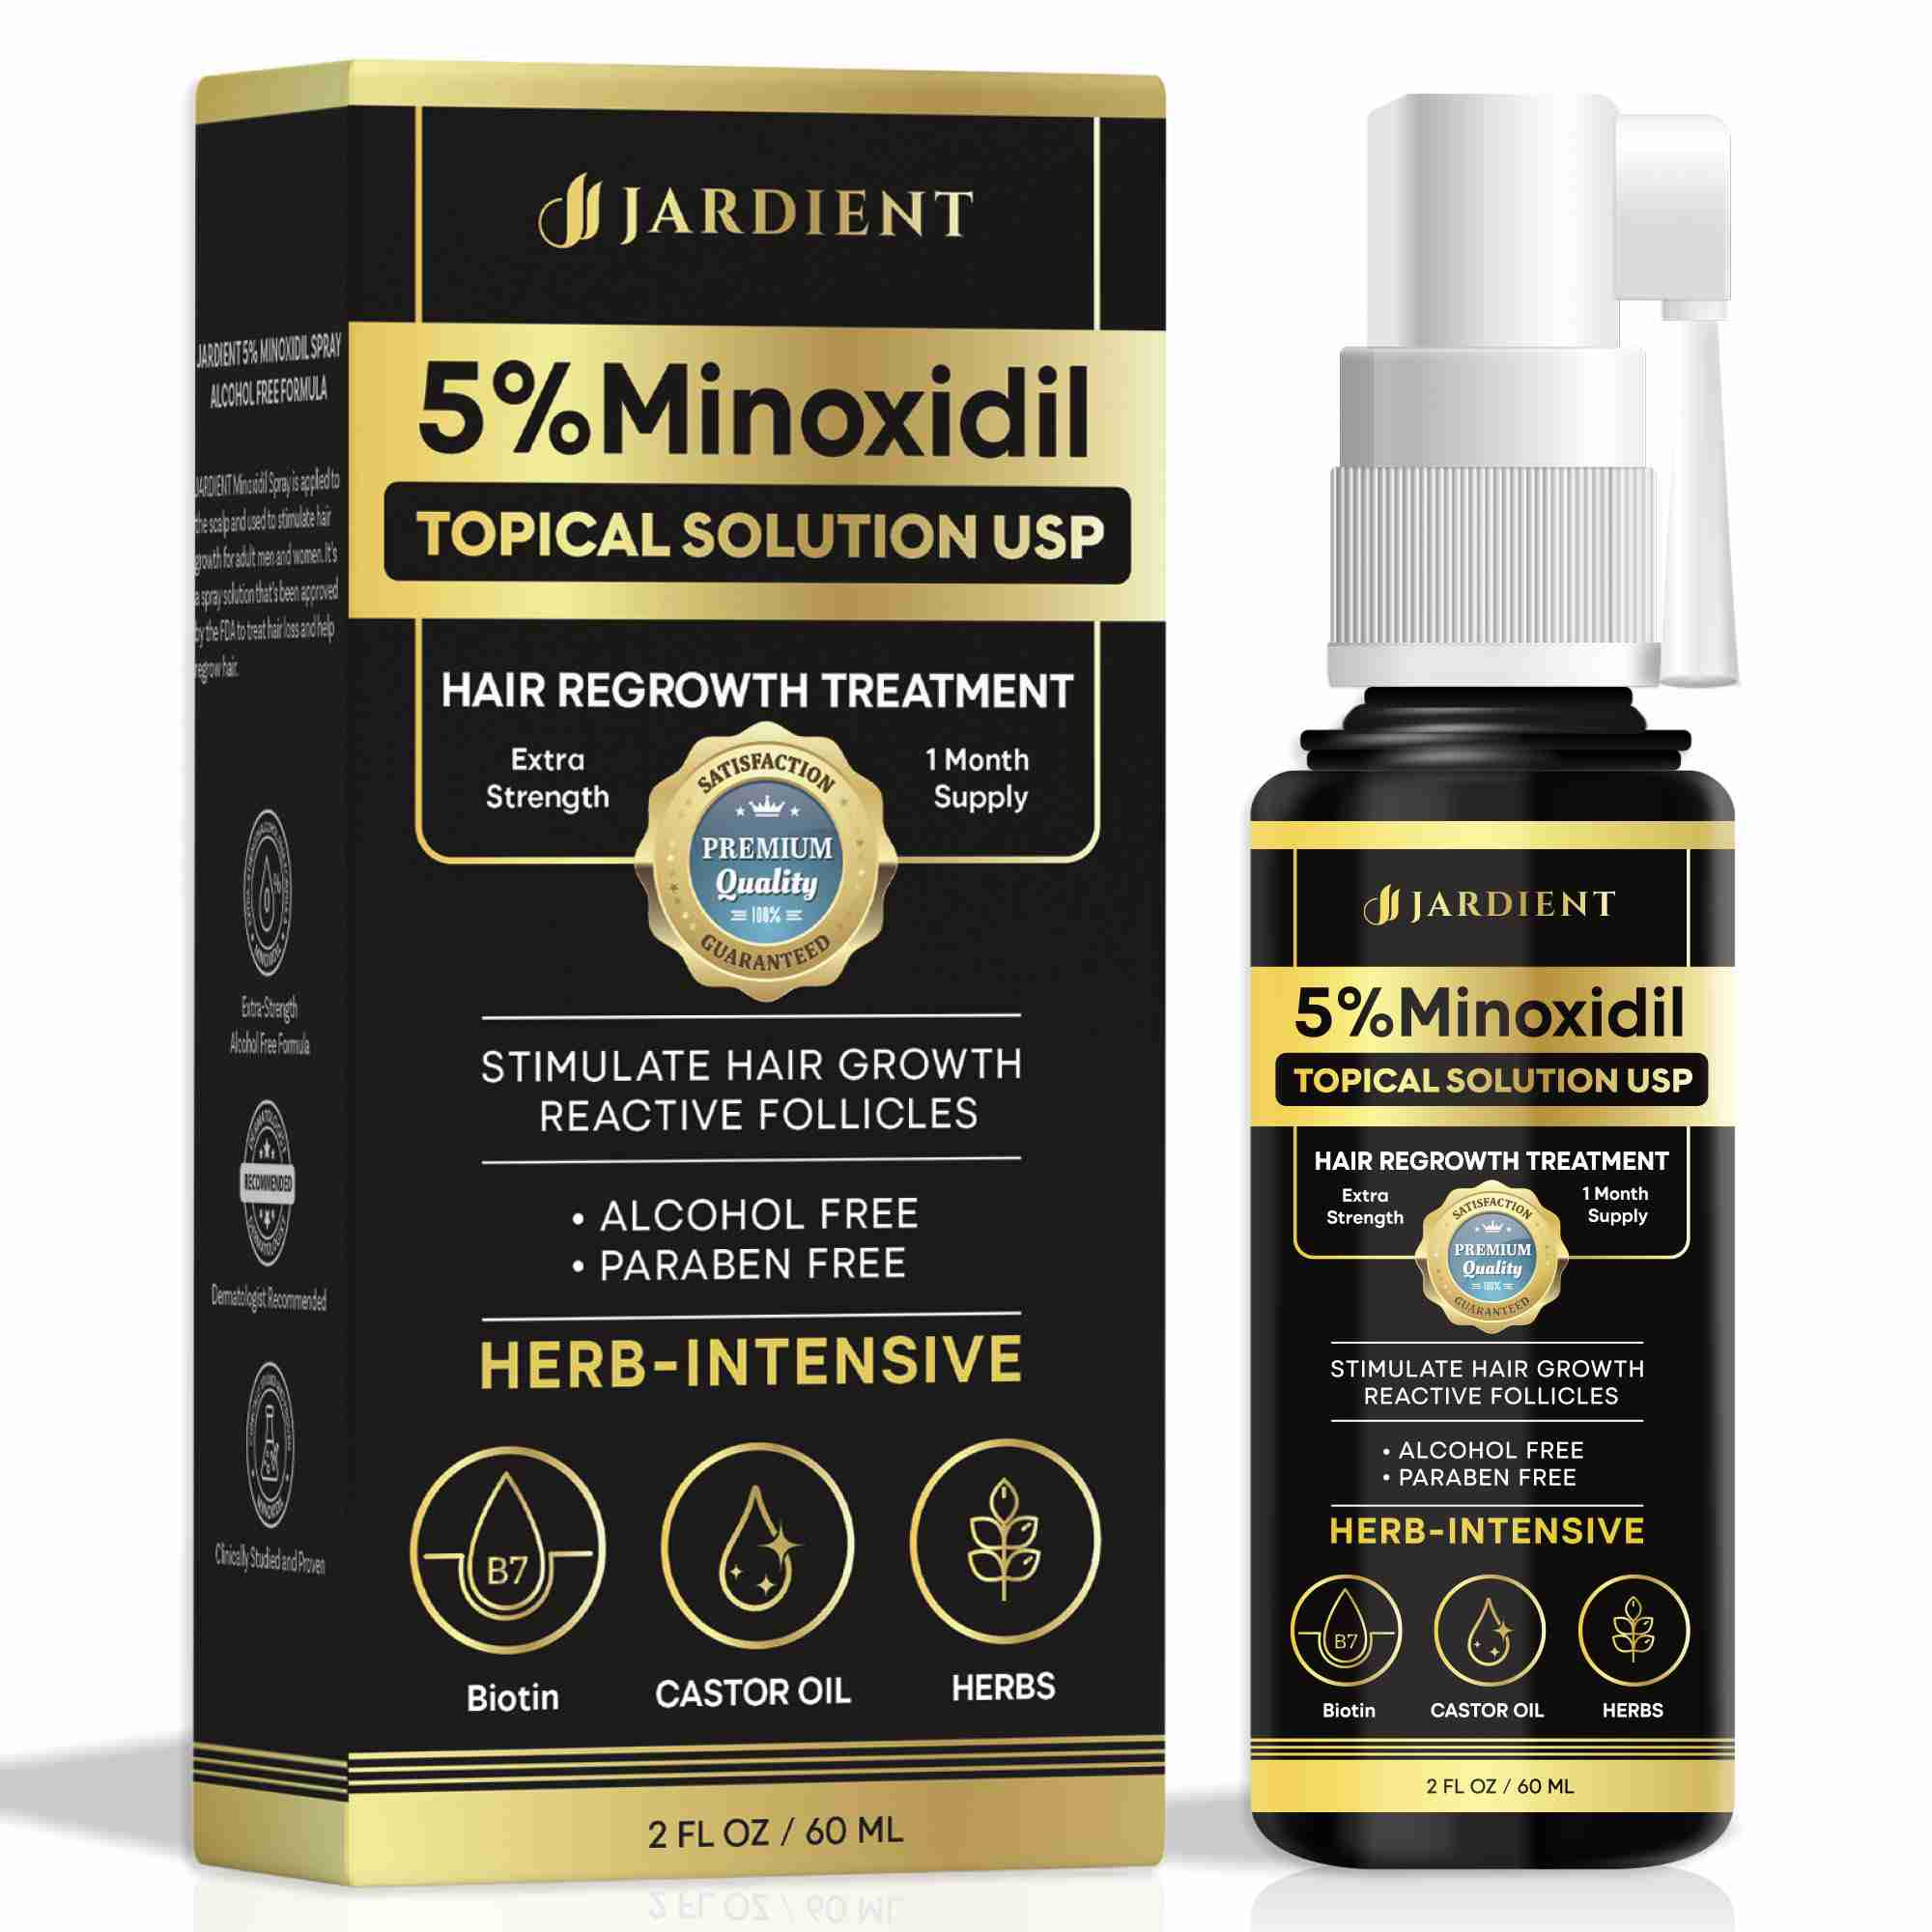 minoxidil-for-women with cash back rebate